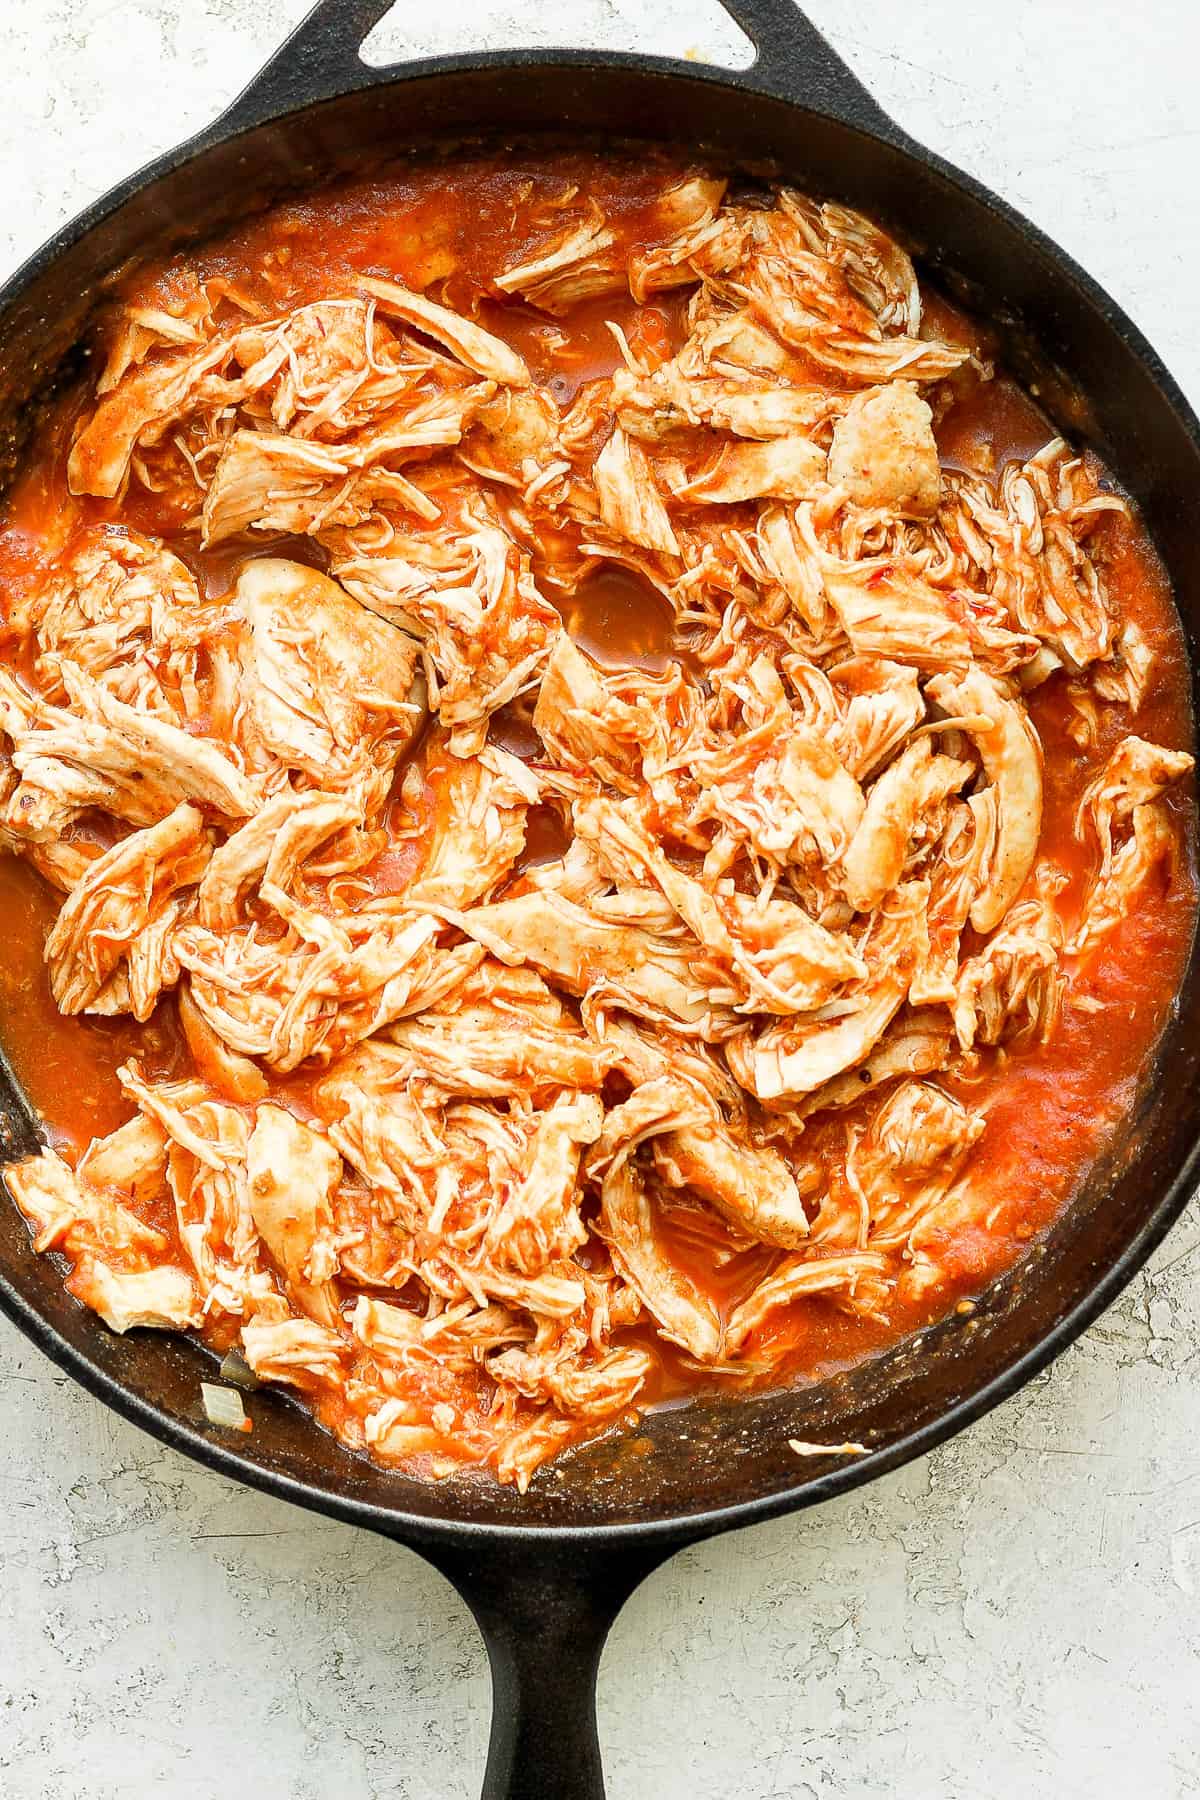 Shredded chicken and tinga sauce in a cast iron skllet.